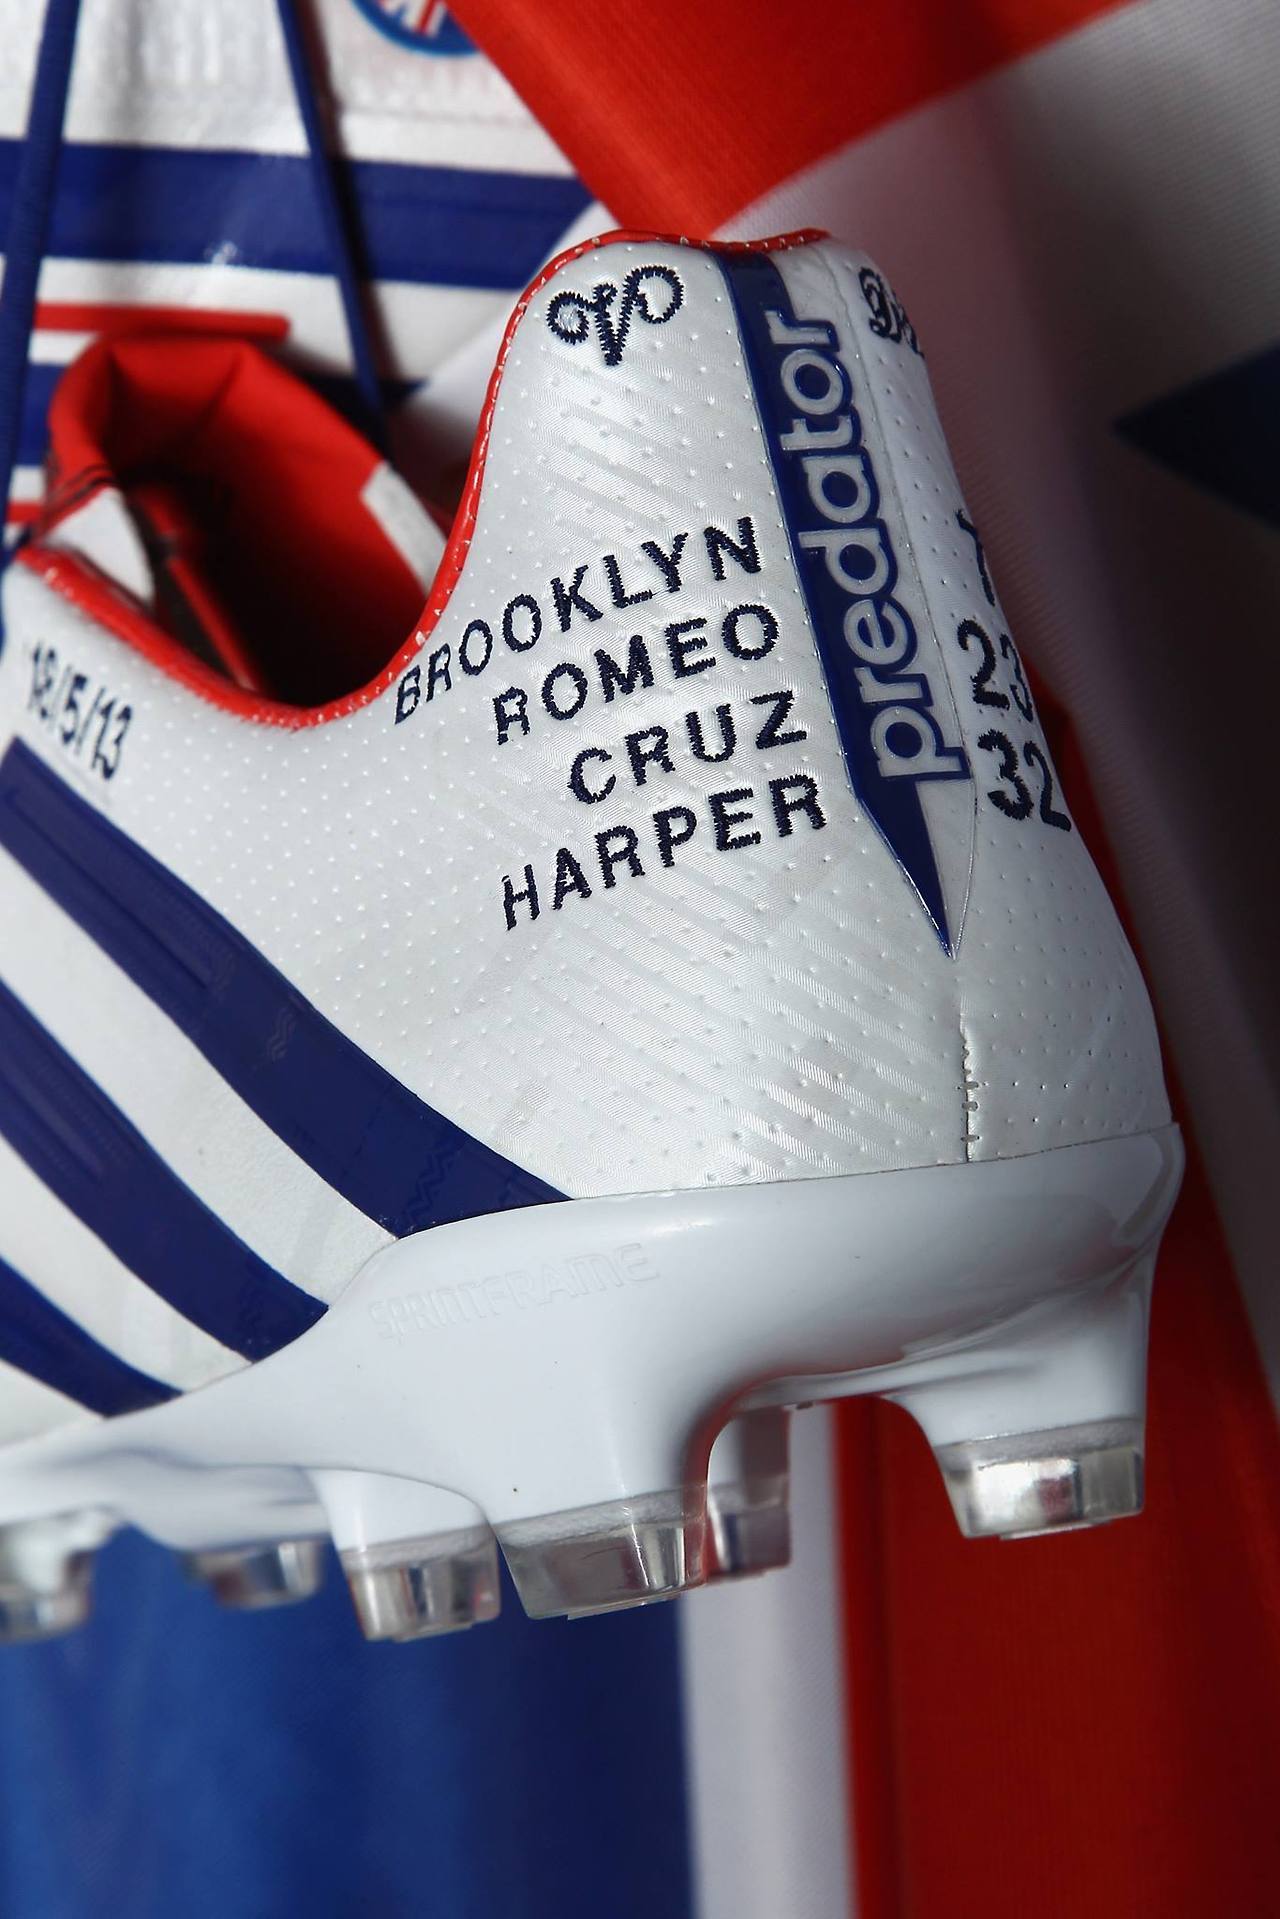 Beckham’s boots for his final game David Beckham plays in the final match of his career today. As he heads into retirement, he carries the pride of Great Britain on his feet with adidas Predator LZs. Typical Becks.